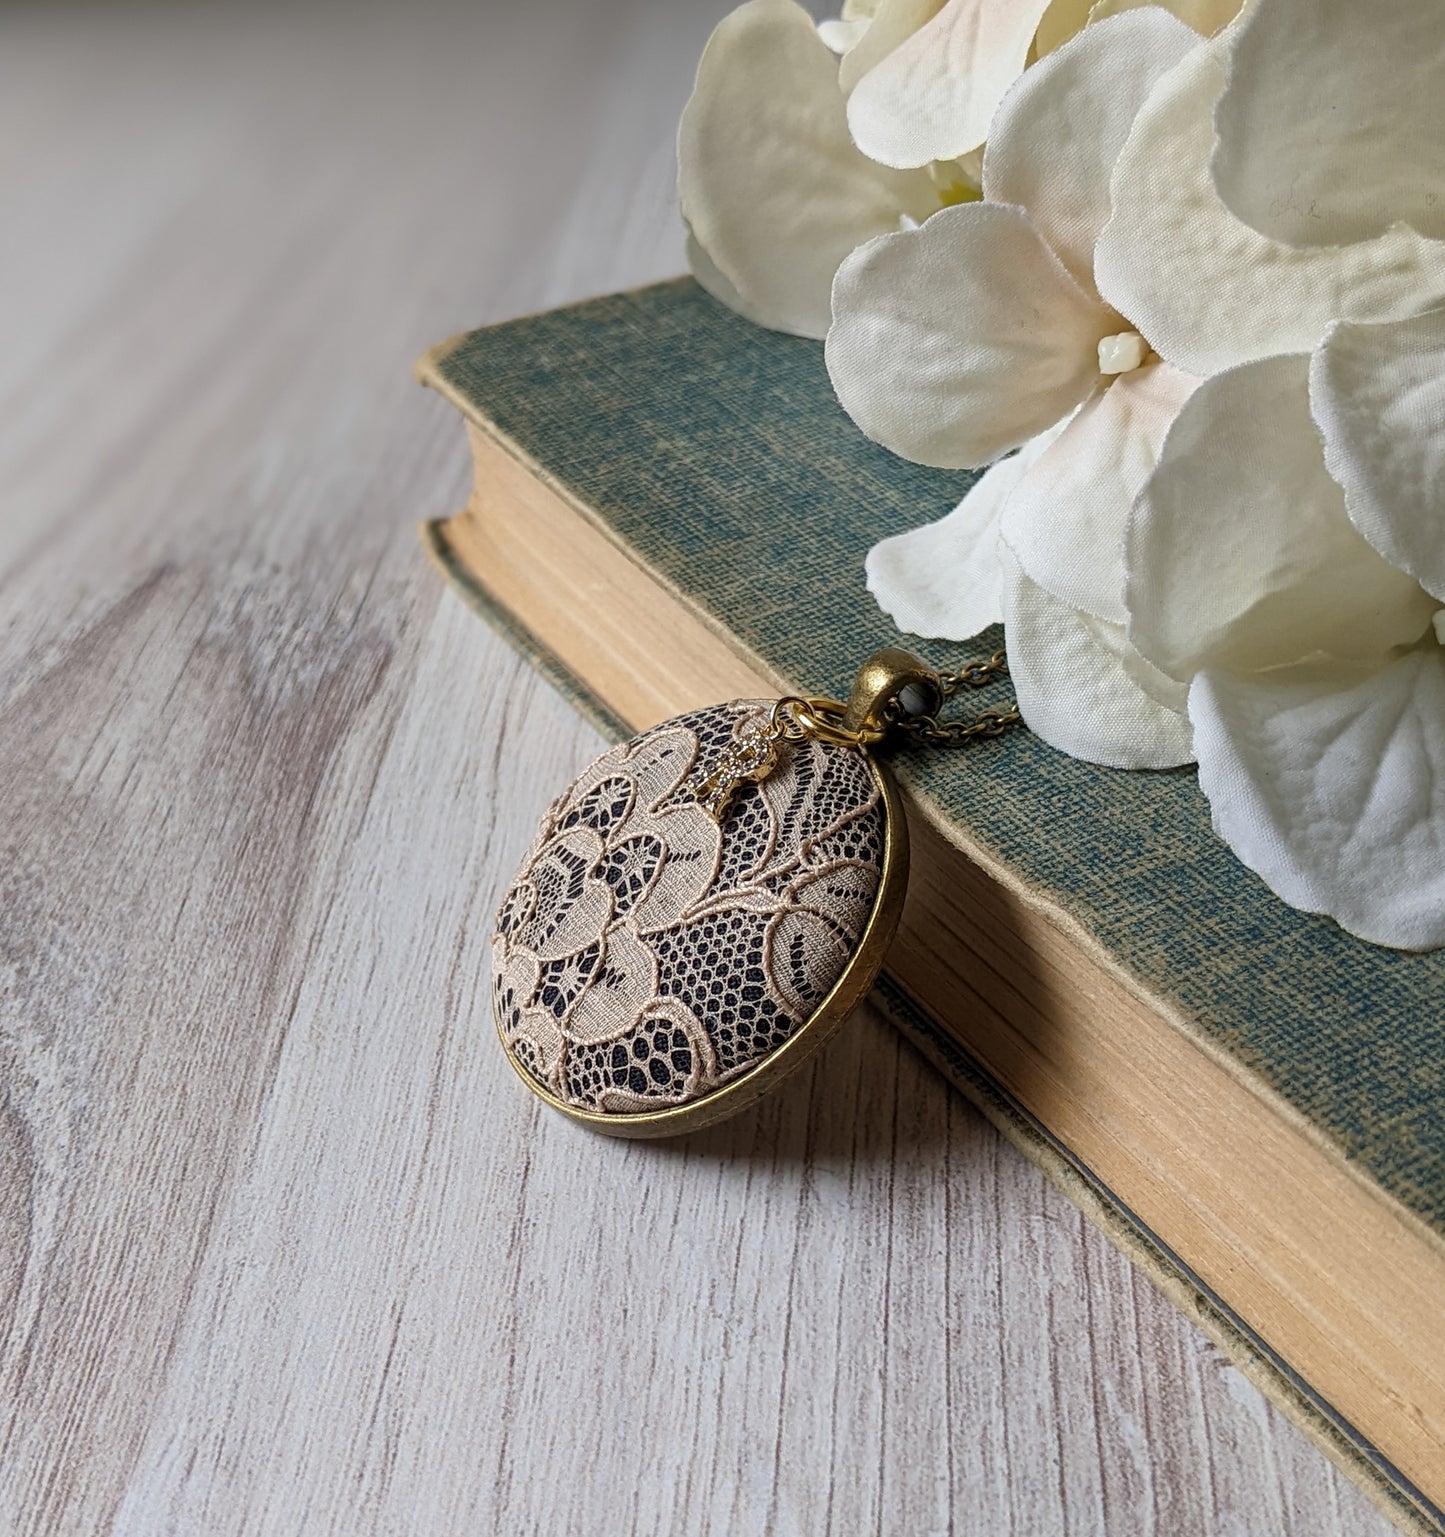 Vintage Lace Pendant, Personalized Initial Necklace, Anniversary Gift For Wife